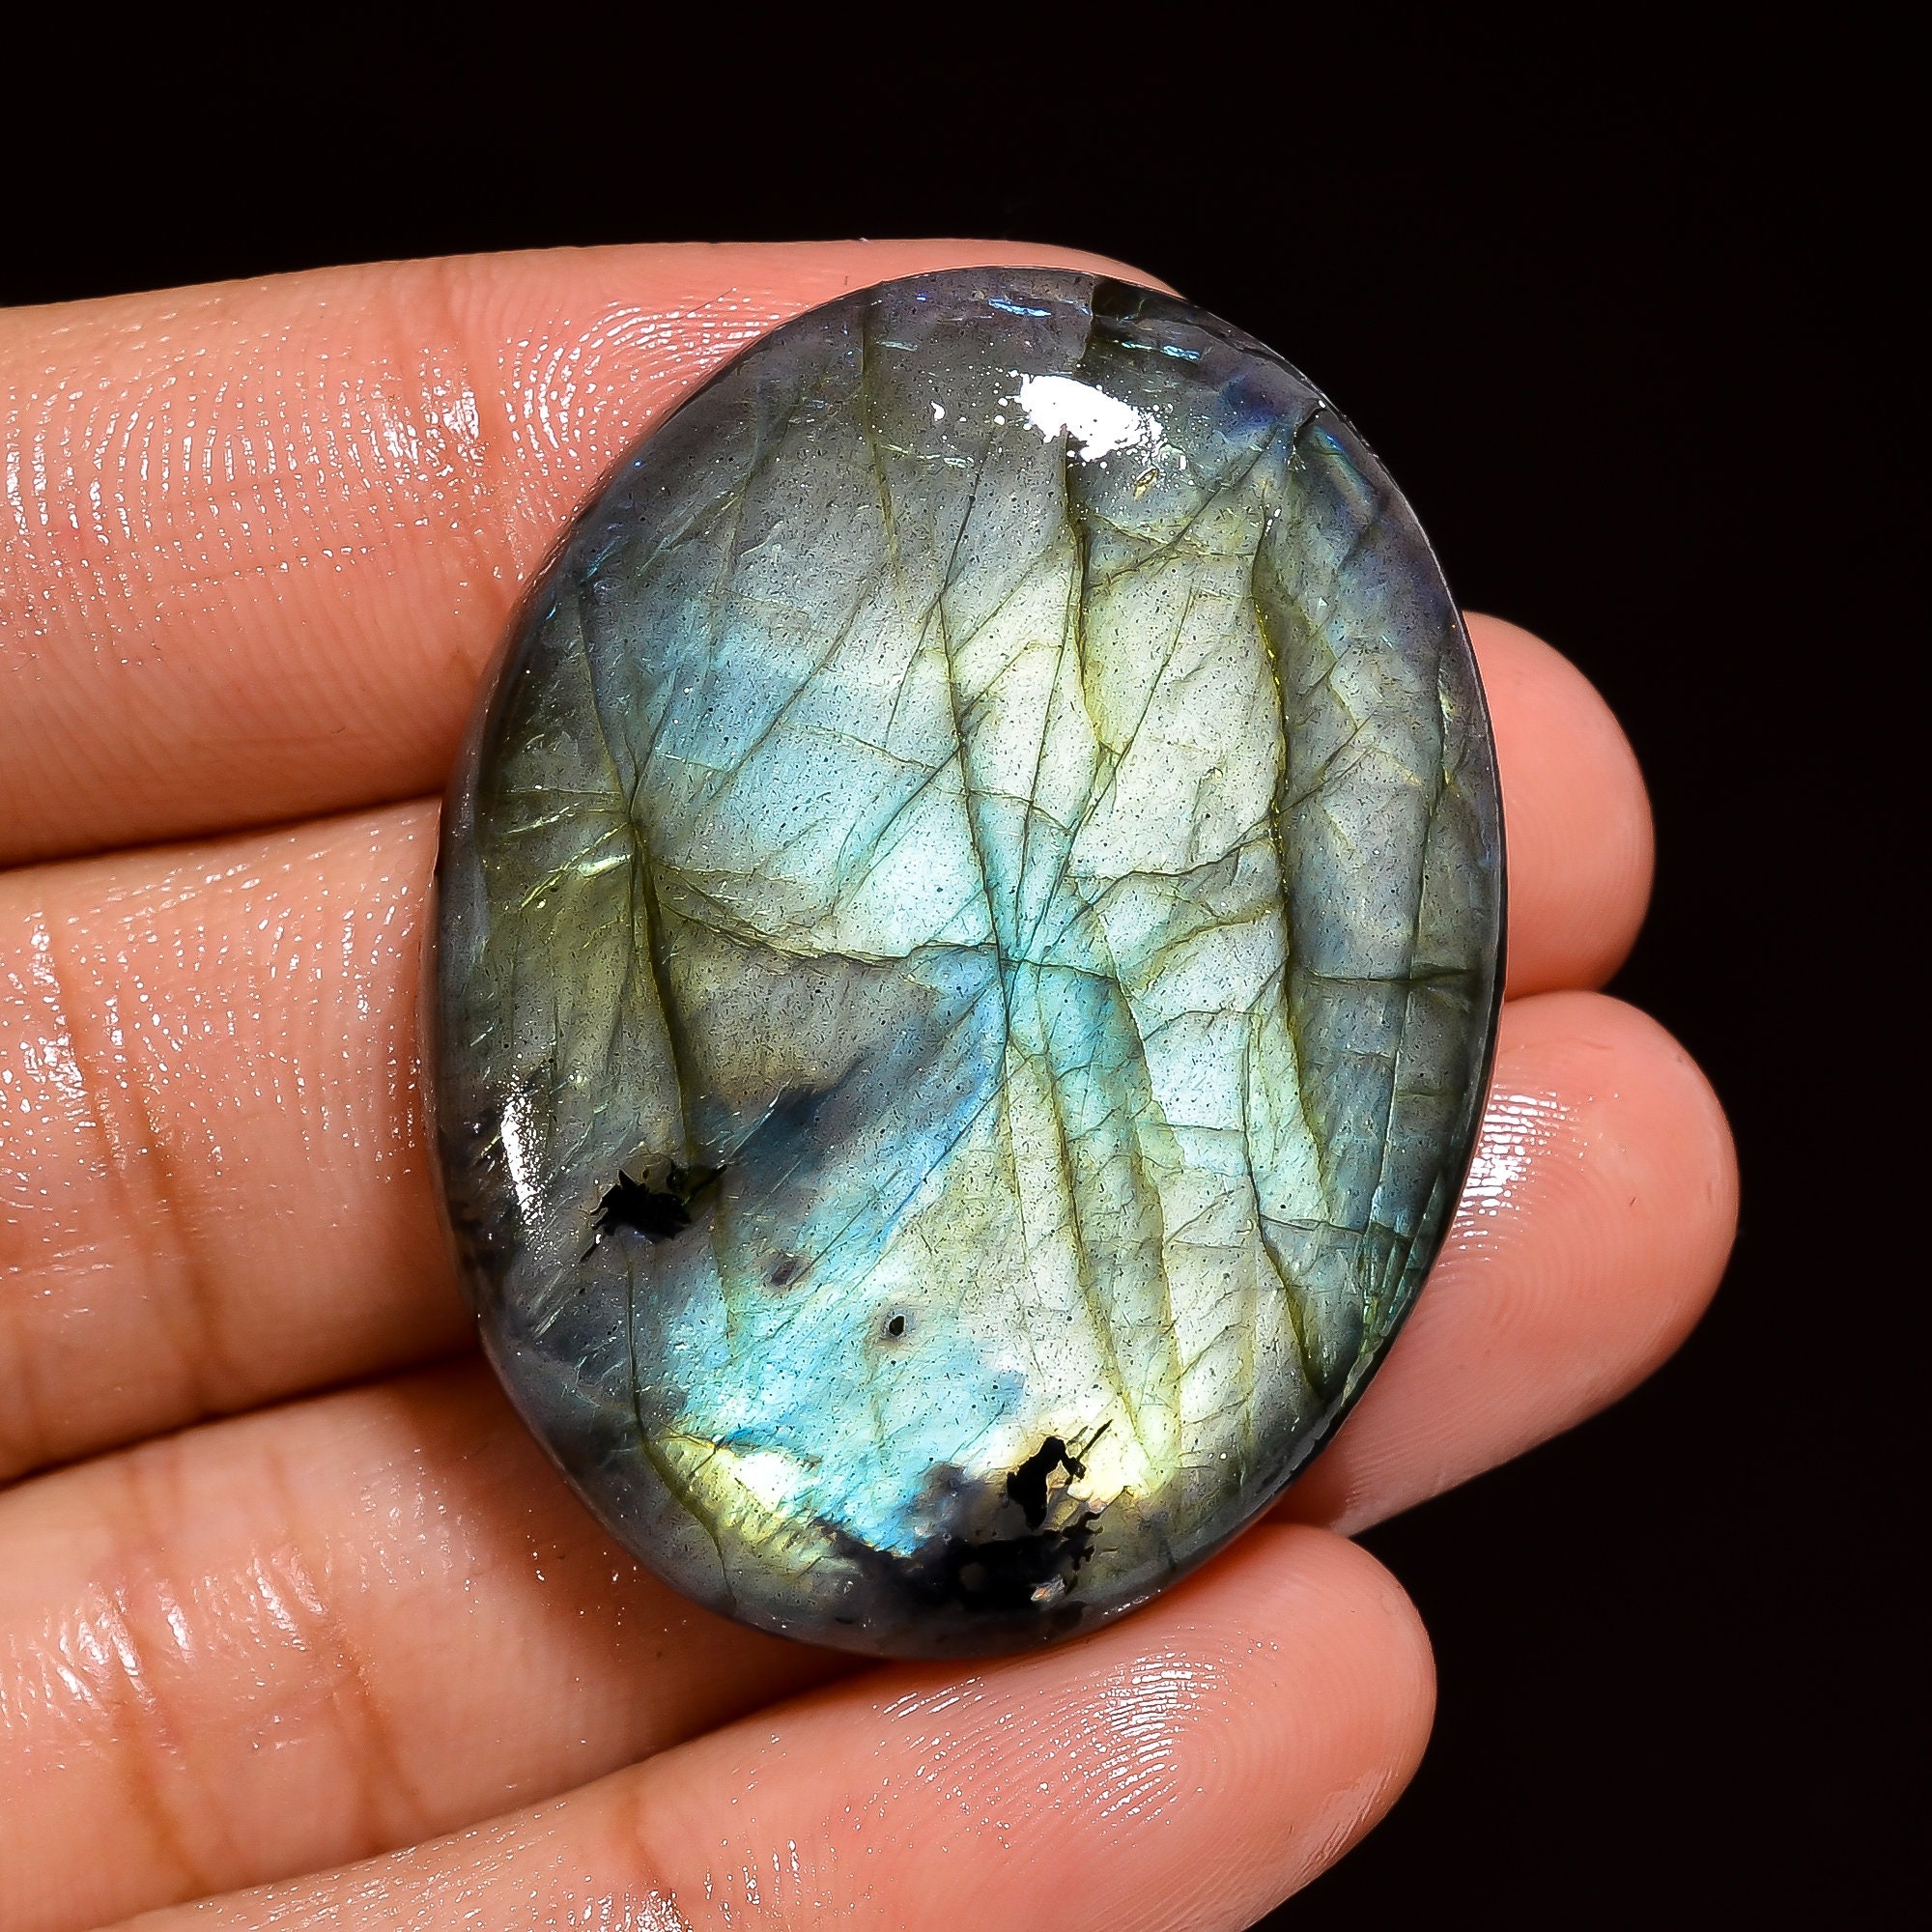 Stunning 100/% Natural Labradorite Oval Shape Cabochon Loose Gemstone 19 Ct Size 22X15X7 mm A-2671 Top Grade Quality For Making Jewelry